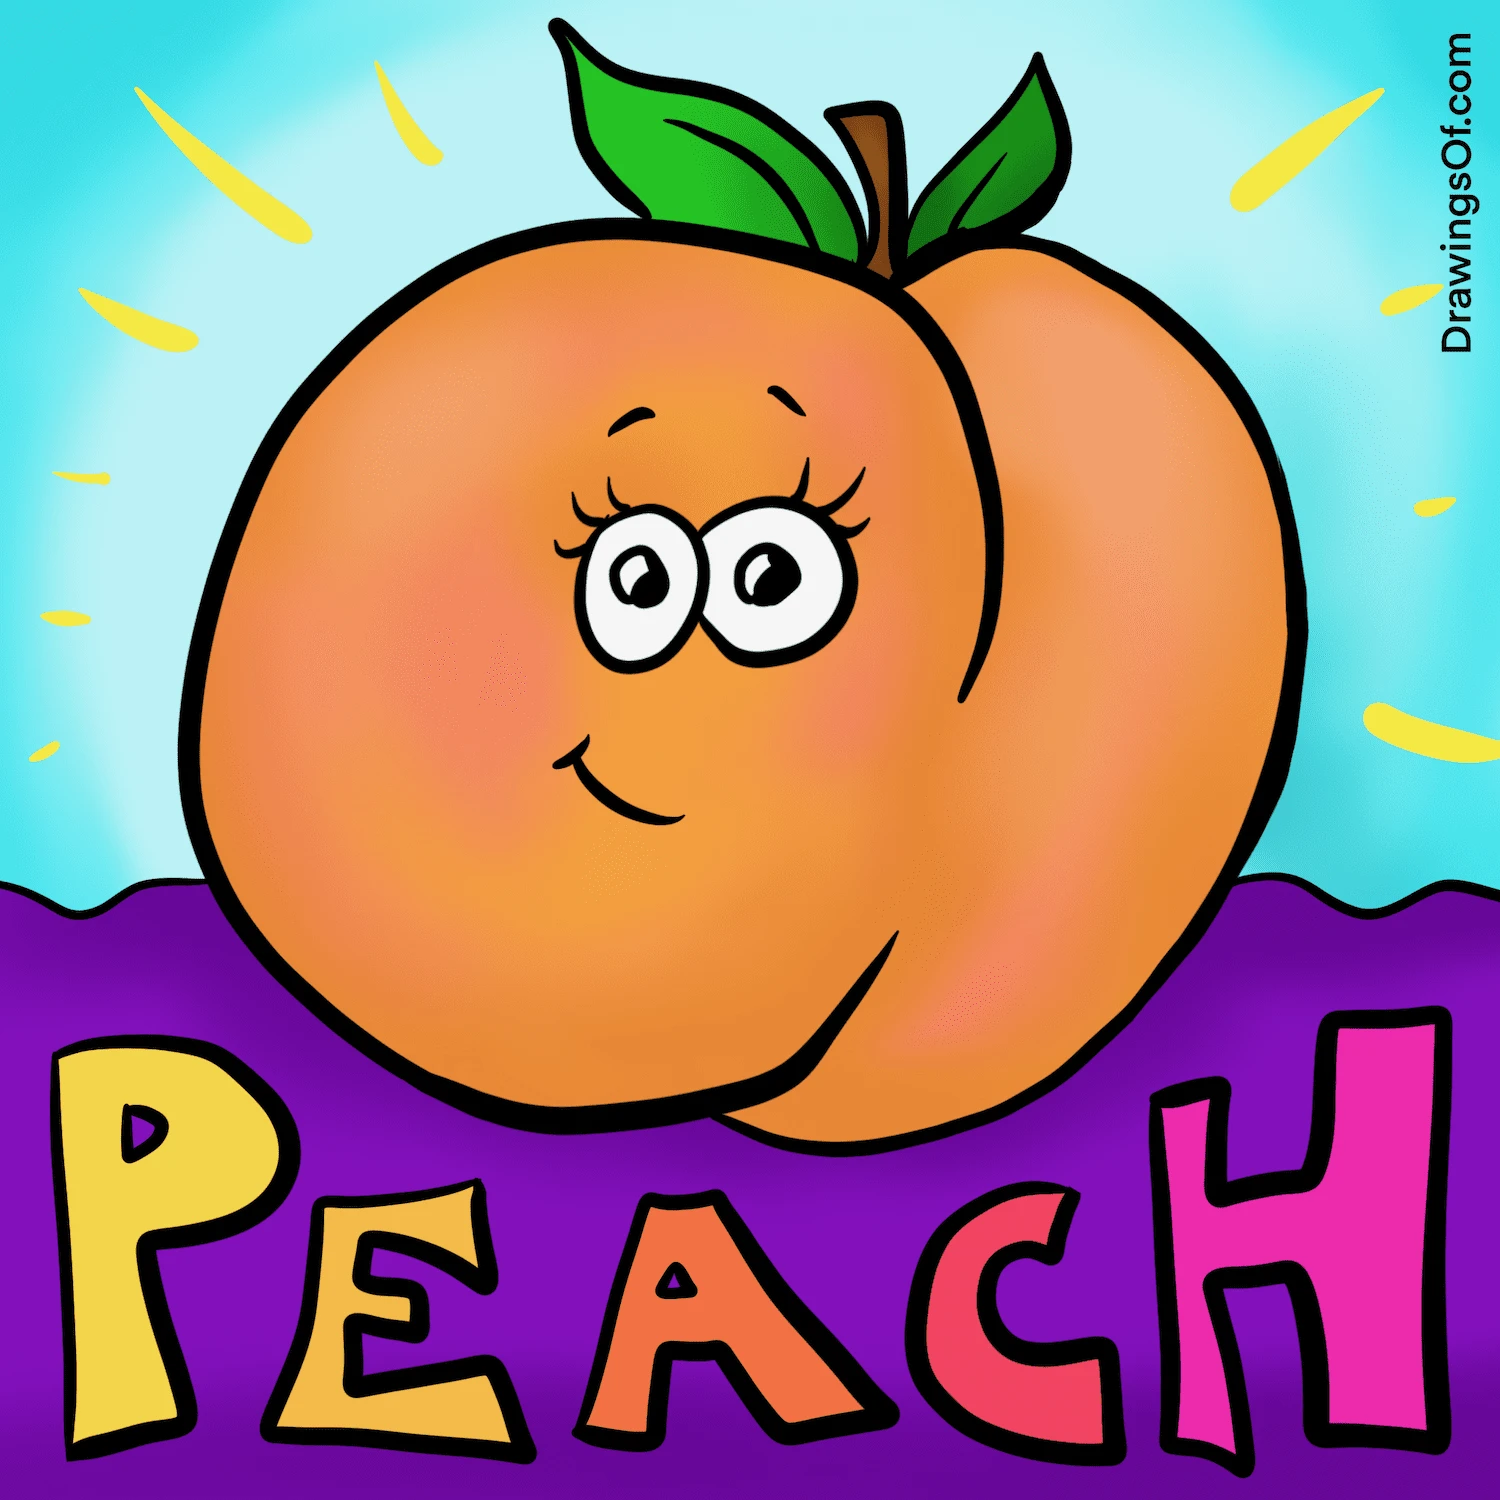 Peach color, on a peach drawing!